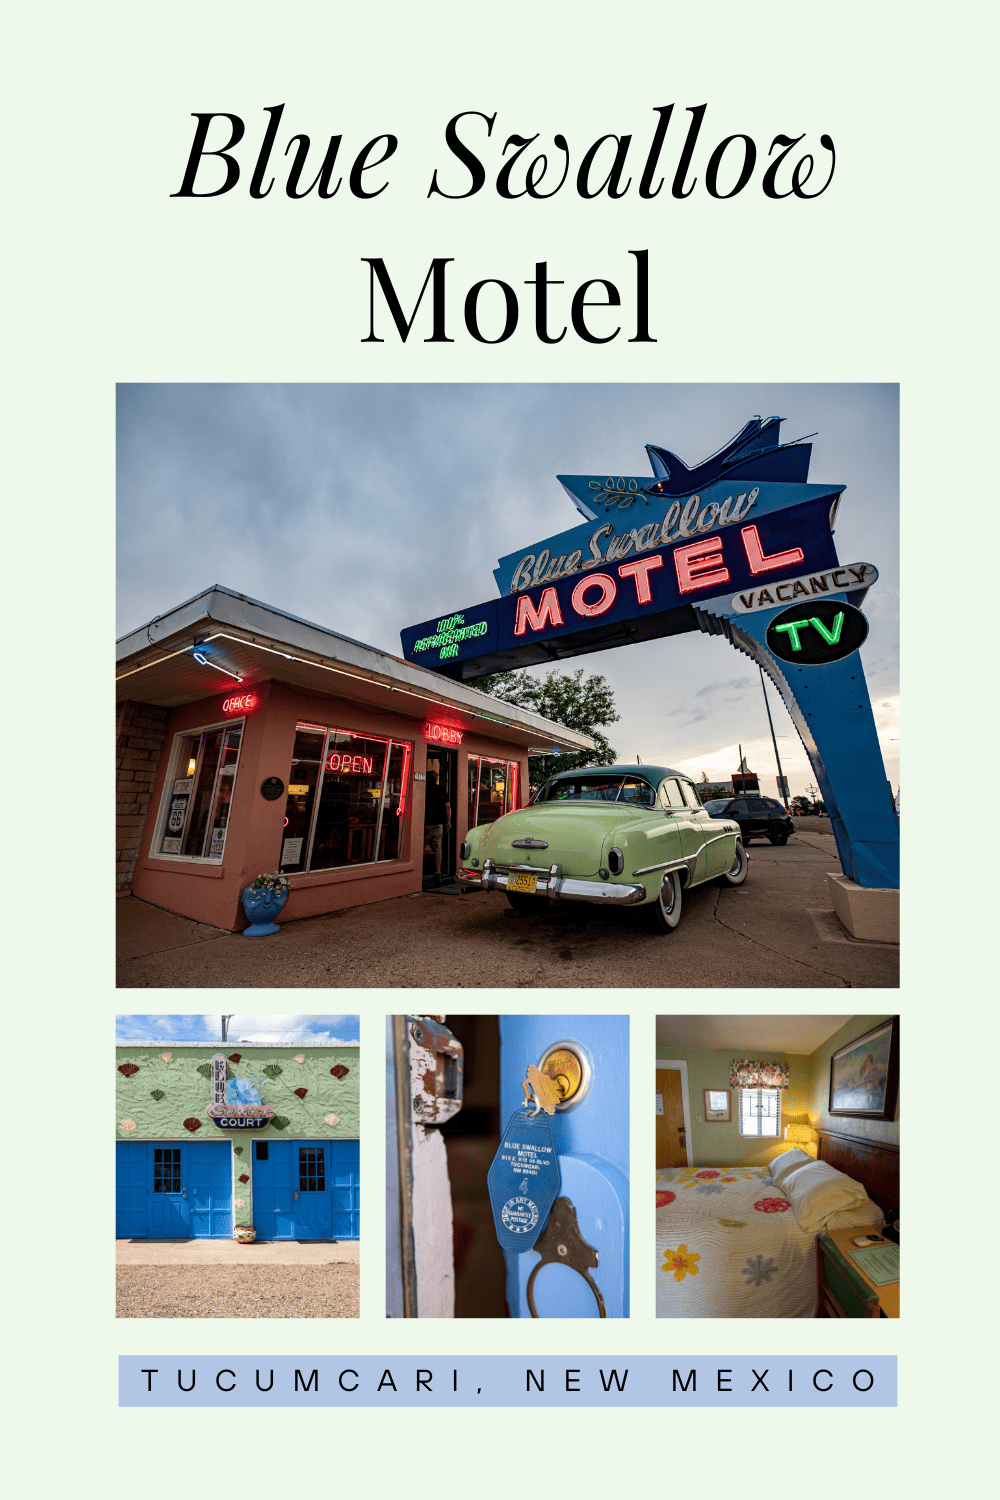 Route 66 is famous for the bright neon signs that light up the way. And perhaps no neon sign on The Mother Road is more recognizable than the one at the Blue Swallow Motel in Tucumcari, New Mexico. Book this fun vintage motel on Route 66 for your New Mexico road trip. Visit the iconic neon sign and add this hotel to your road trip itinerary and your travel bucket list. #Route66 #VintageMotel #Motel #Route66Motel #Route66Motels #Route66RoadTrip #NewMexico #NewMexicoRoadTrip